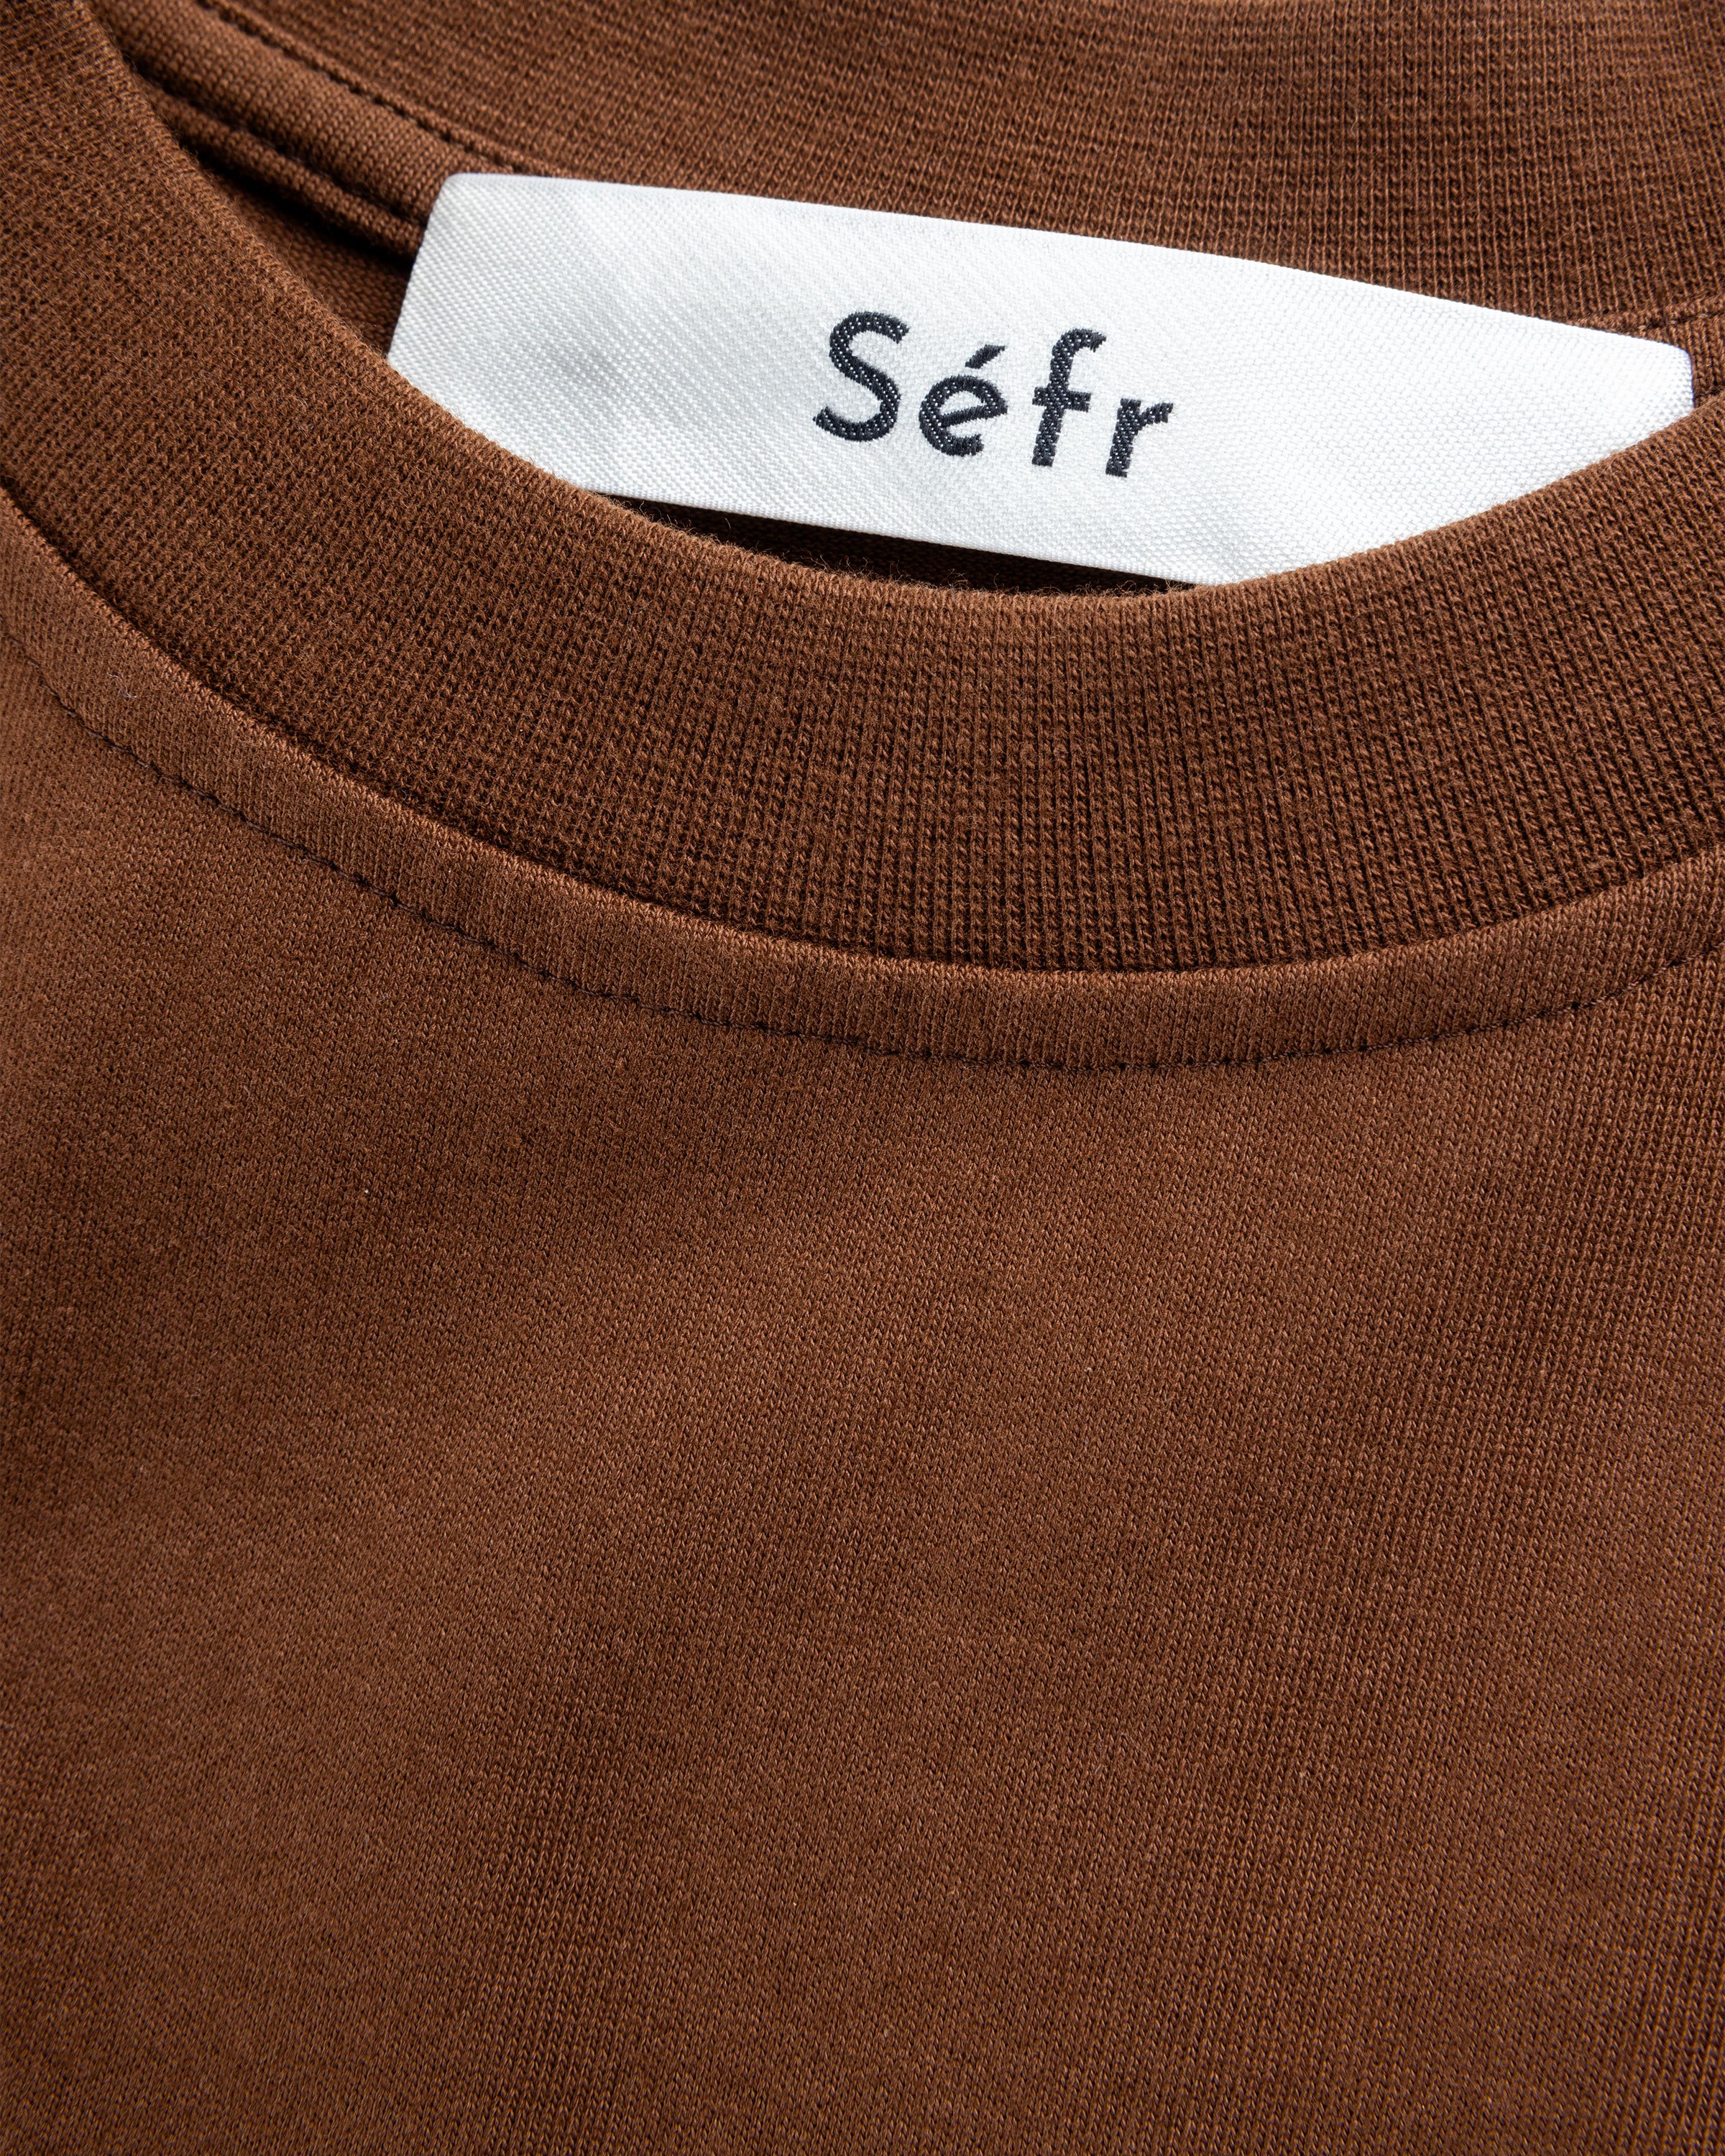 Séfr - ATELIER TEE HEAVY BROWN COTTON - Clothing - Brown - Image 6